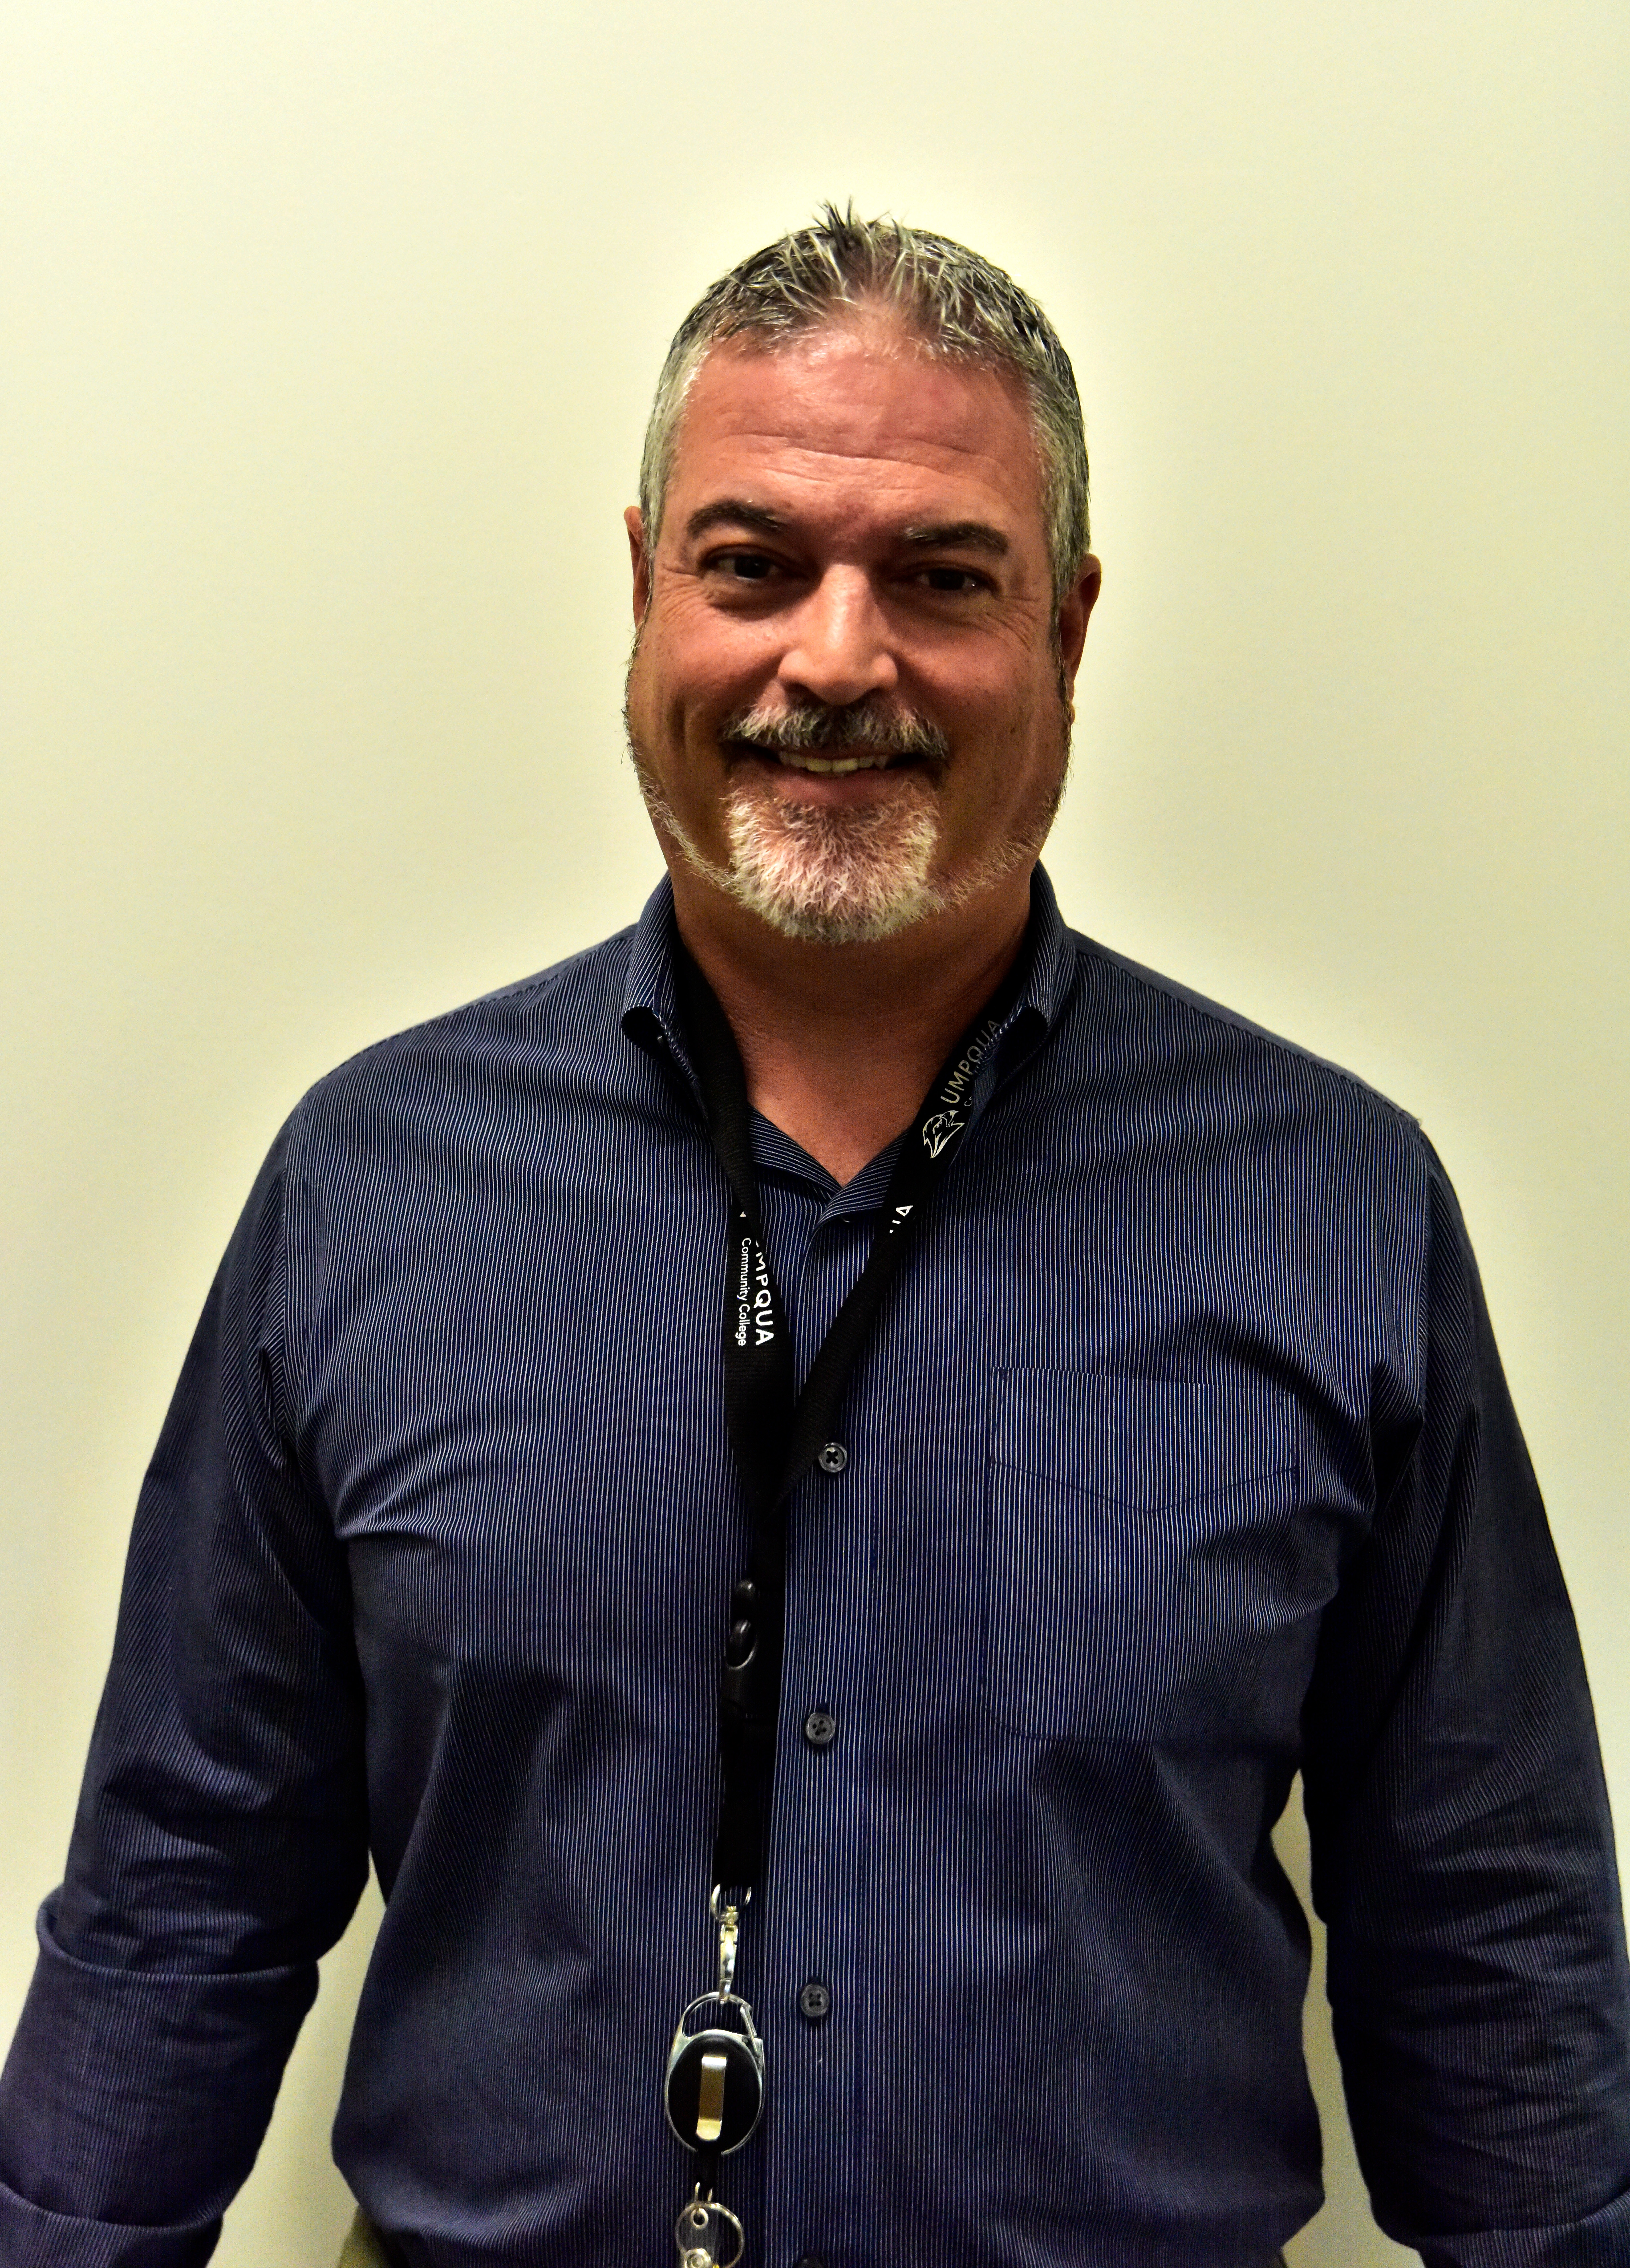 A man is standing with a smile in front of a plain off-white wall. He has short grey and white hair and a goatee that is predominantly white. He is wearing a long sleeved blue shirt with a black lanyard around his neck.